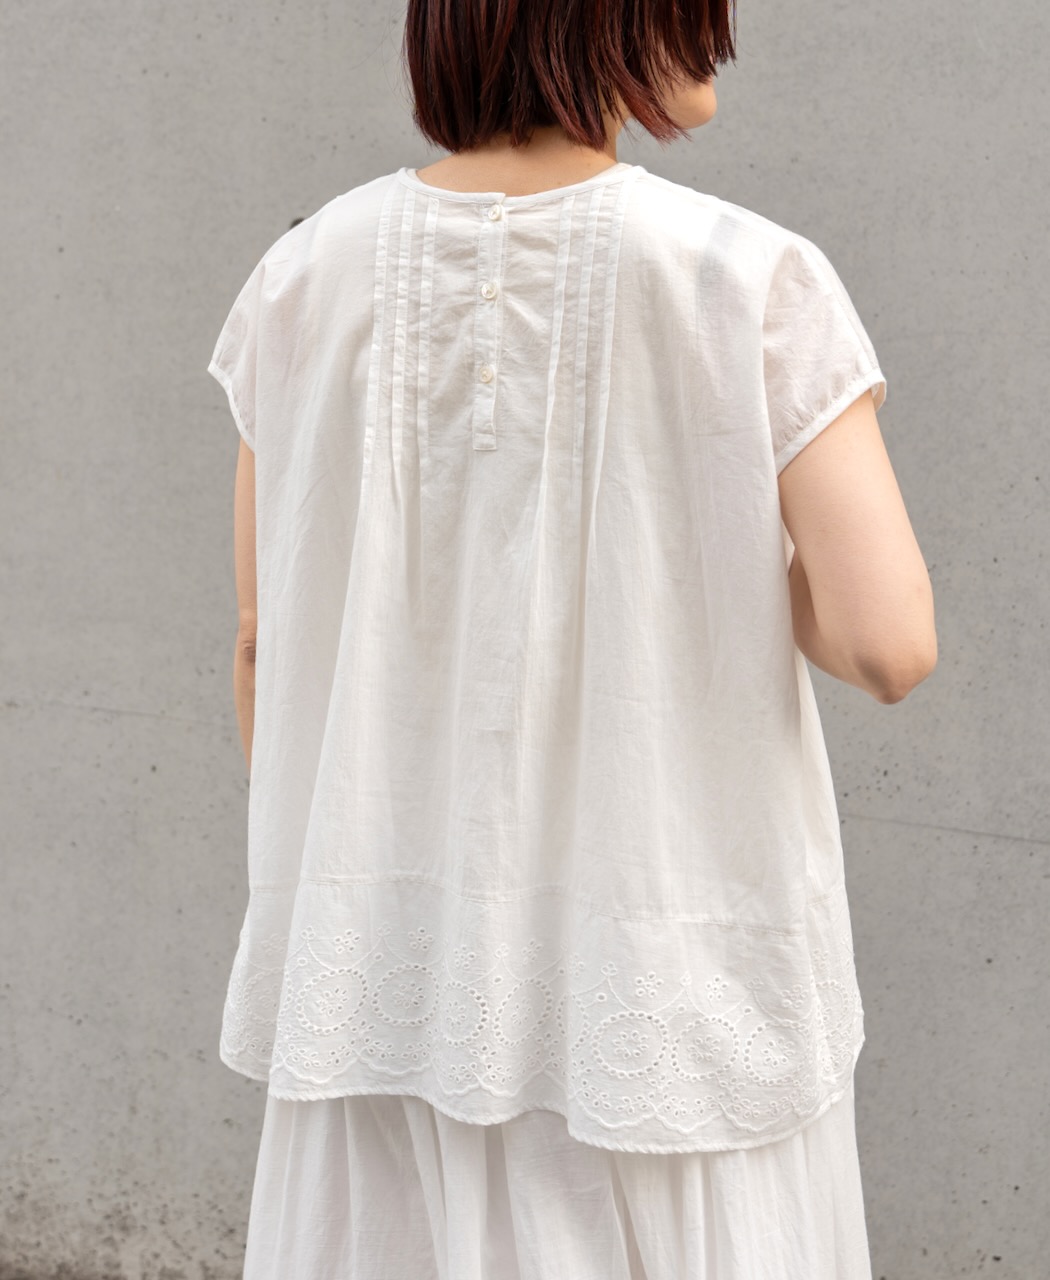 INSL24223 (ブラウス) 80'S VOILE PLAIN WITH CUT WORK LACE CREW-NECK FRENCH/SL SHIRT WITH PINTUCK